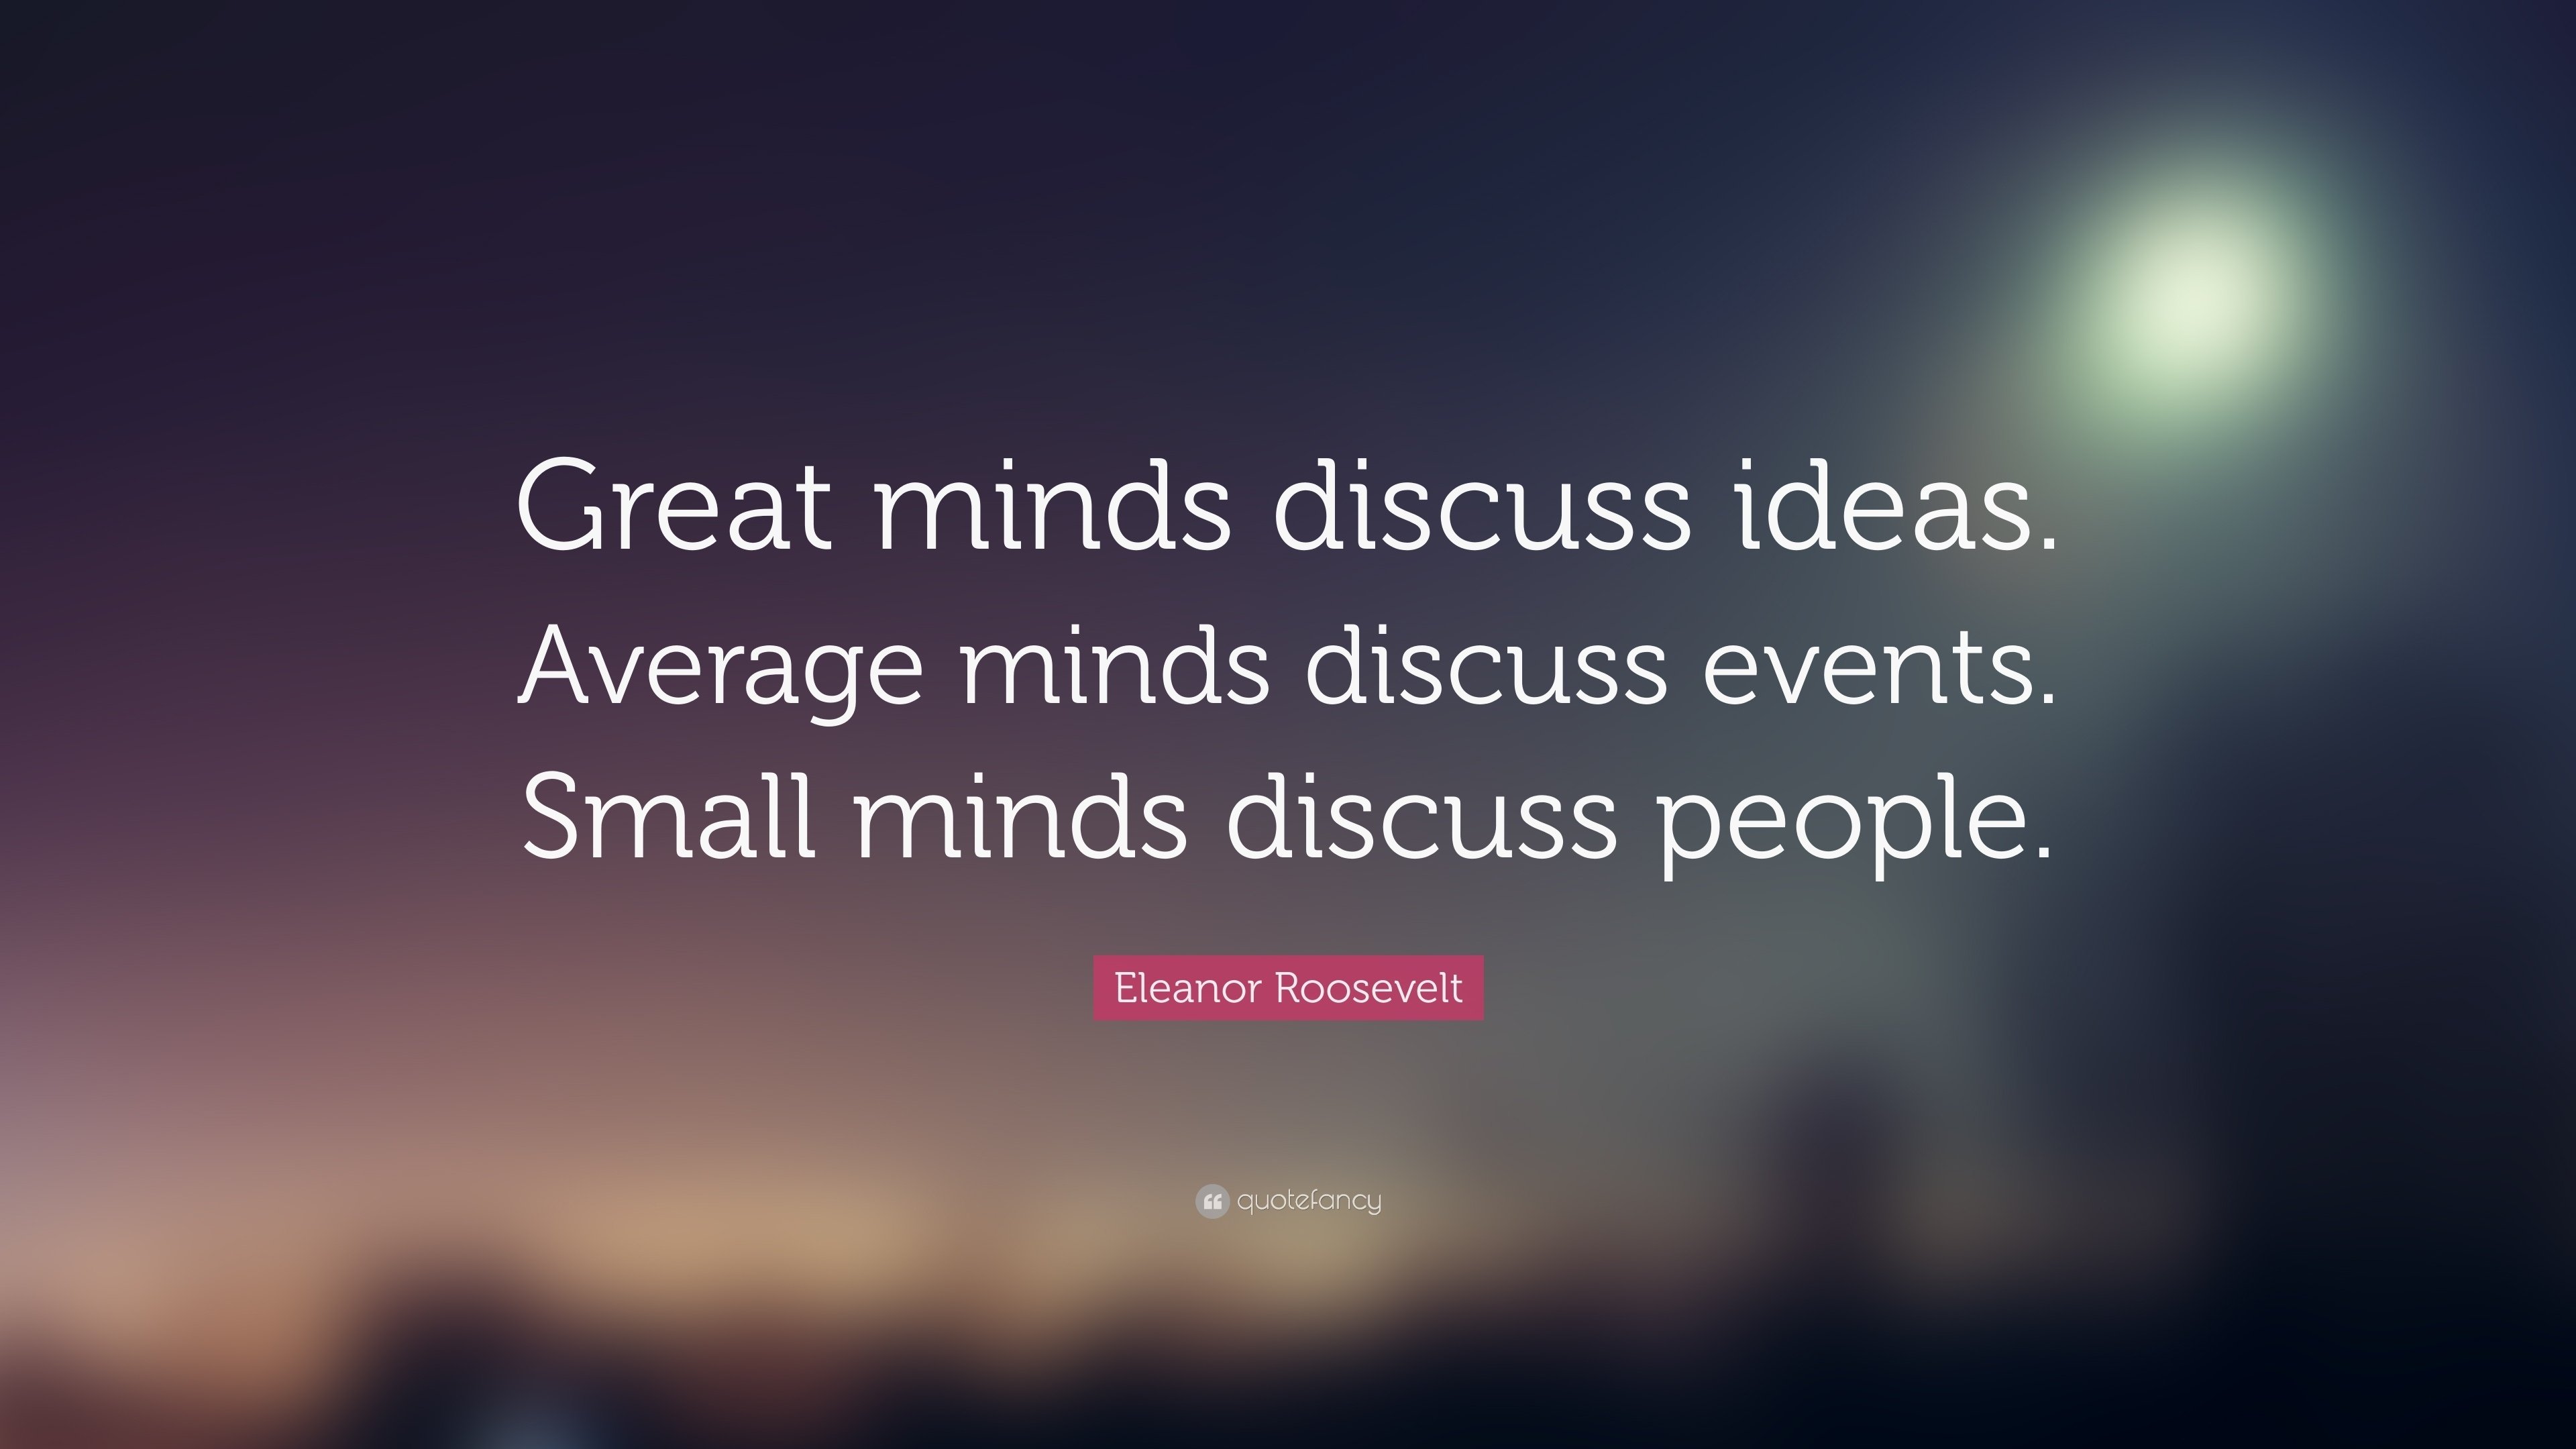 10 Pretty Great Minds Discuss Ideas Average Minds Discuss Events eleanor roosevelt quote great minds discuss ideas average minds 5 2022